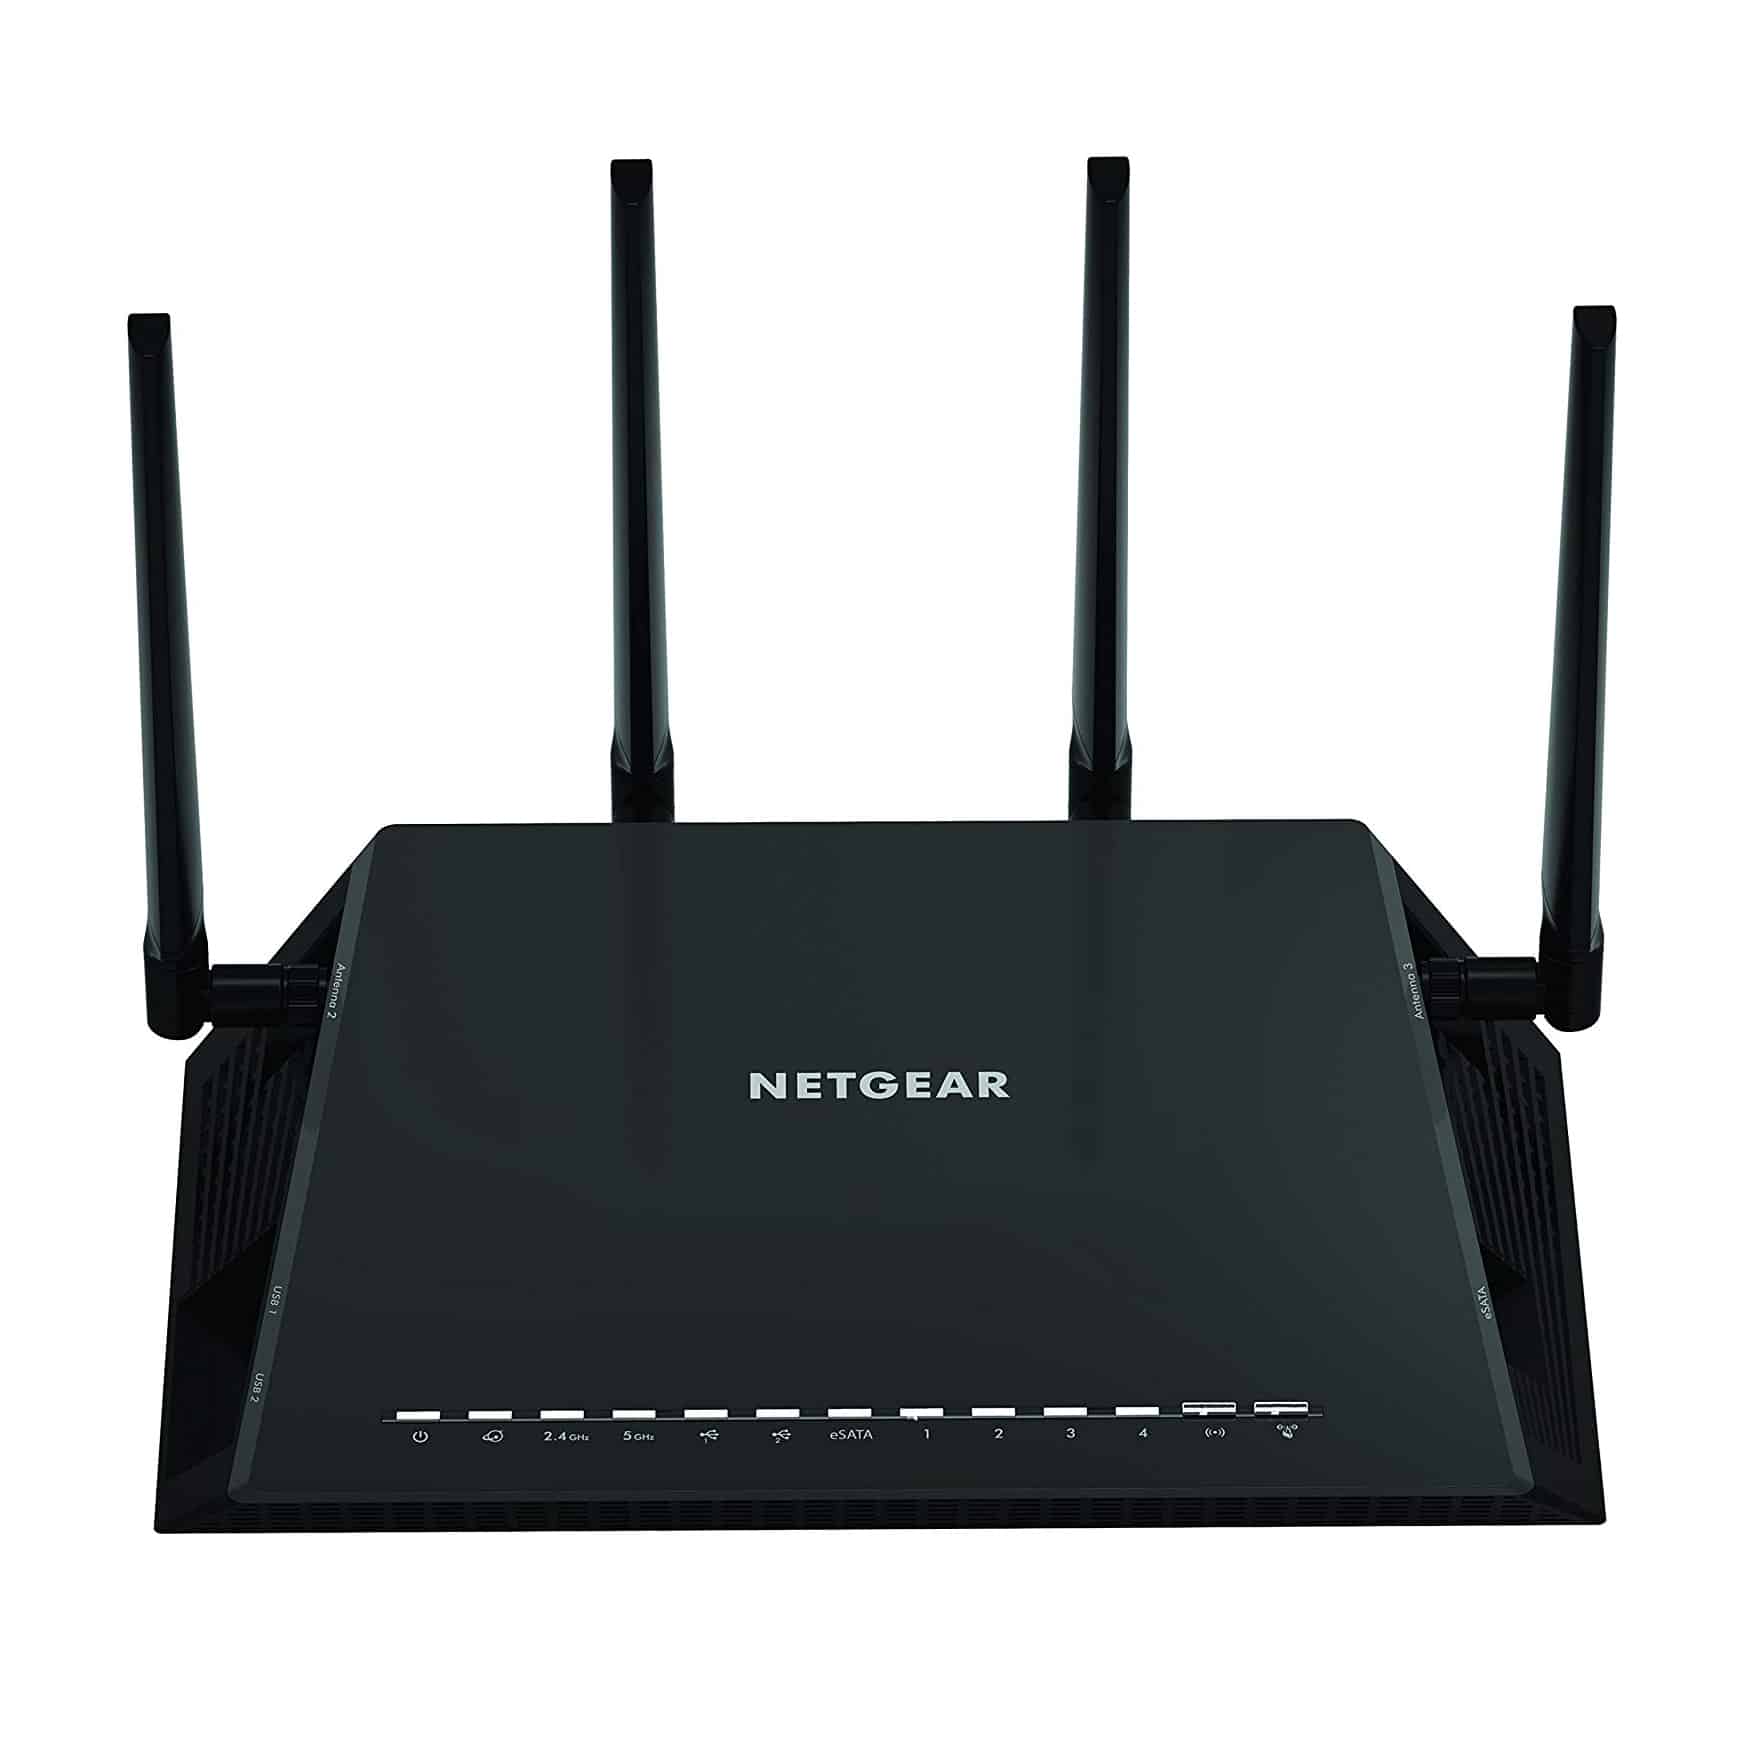 Top 10 Best Long Range Wifi Routers in 2022 Reviews | Buyer's Guide